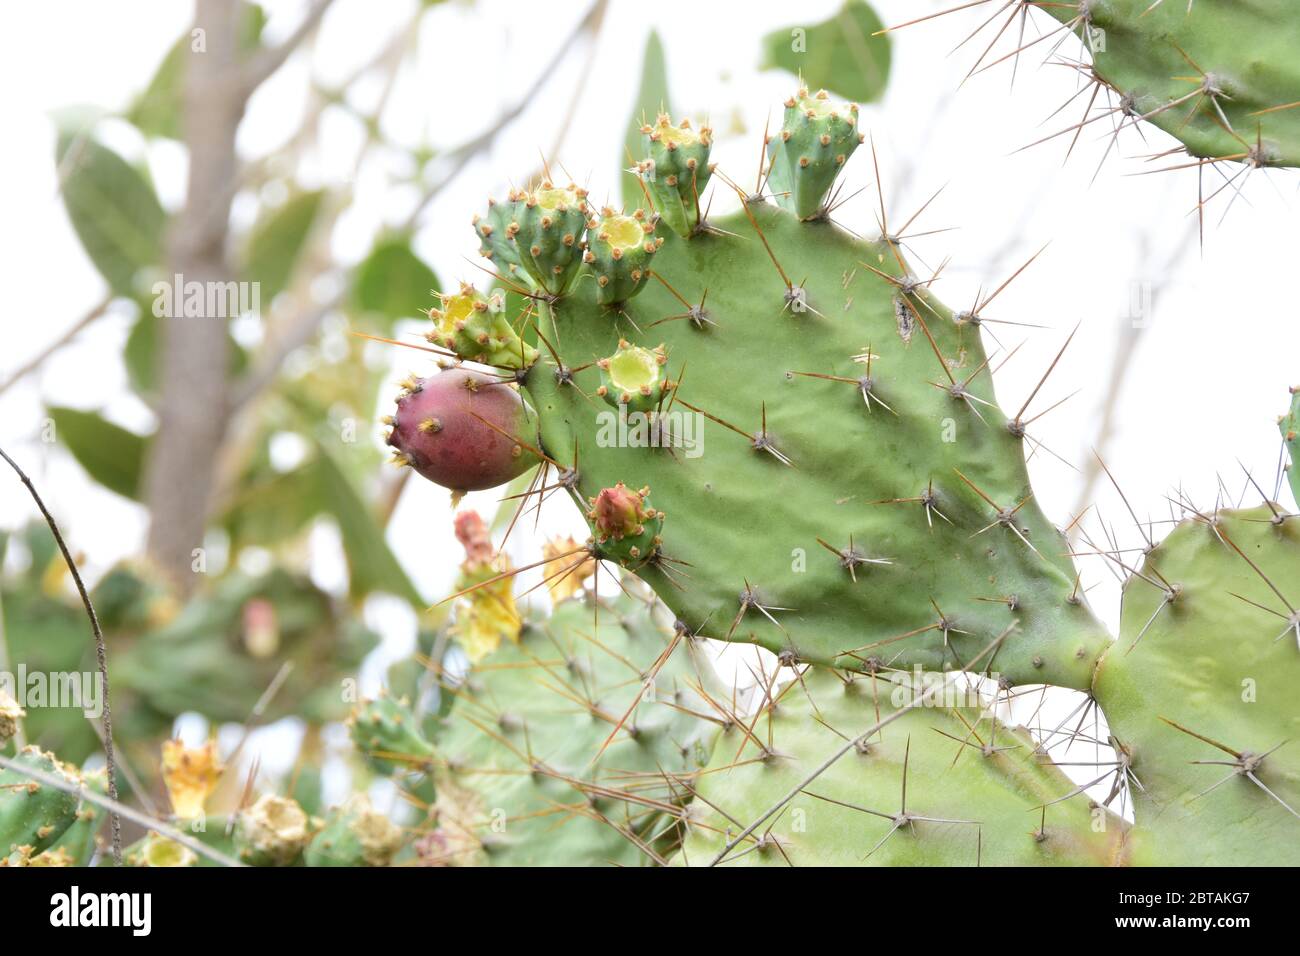 View of the flowers and leaves of a thorny cactus in the jungles of Rajasthan Stock Photo